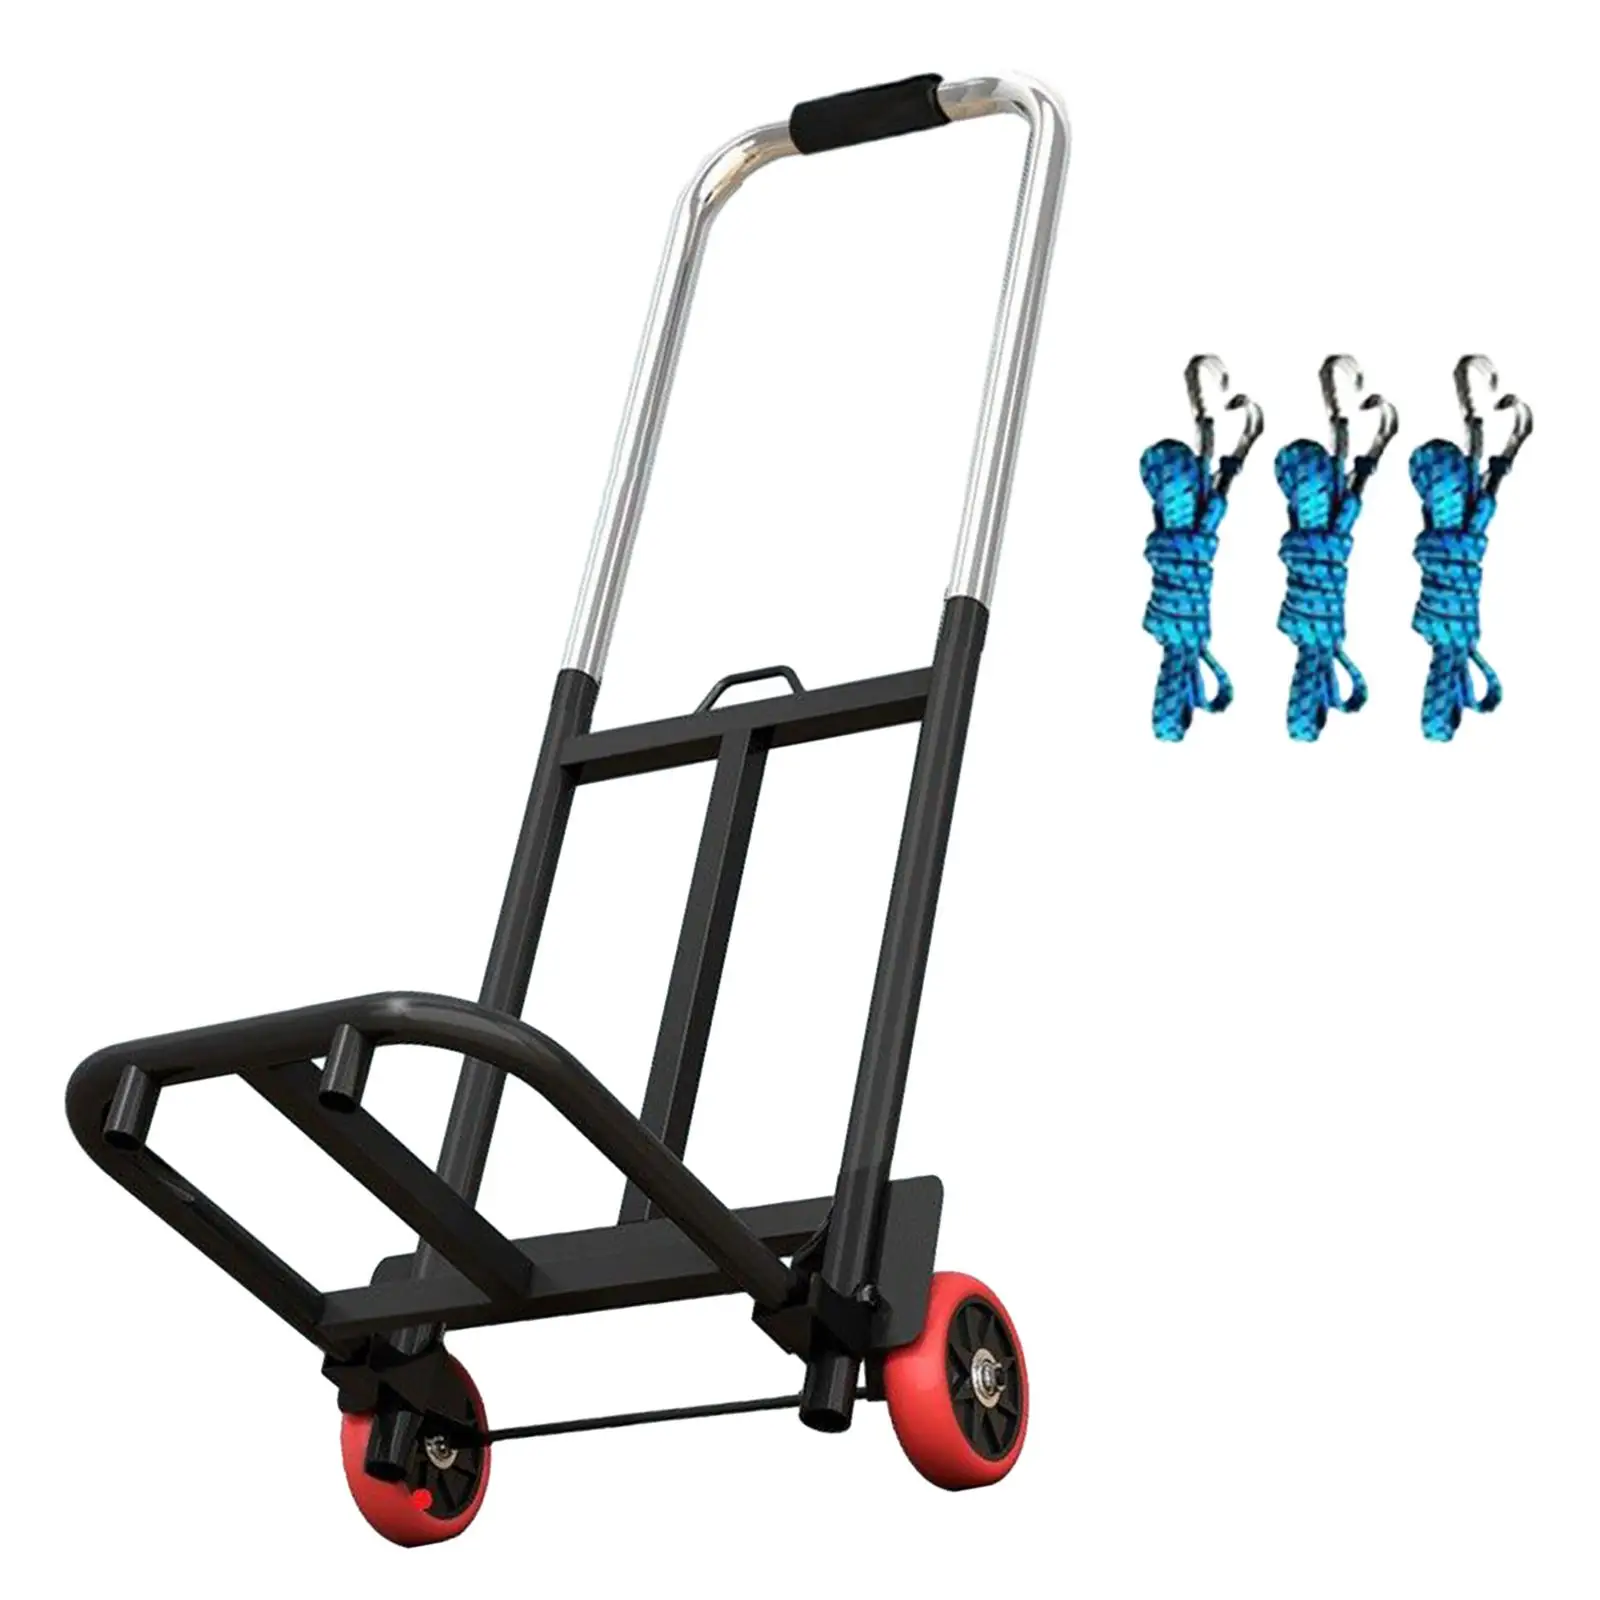 Folding Hand Truck Luggage Trolley Cart Sturdy Telescoping Handle for Office